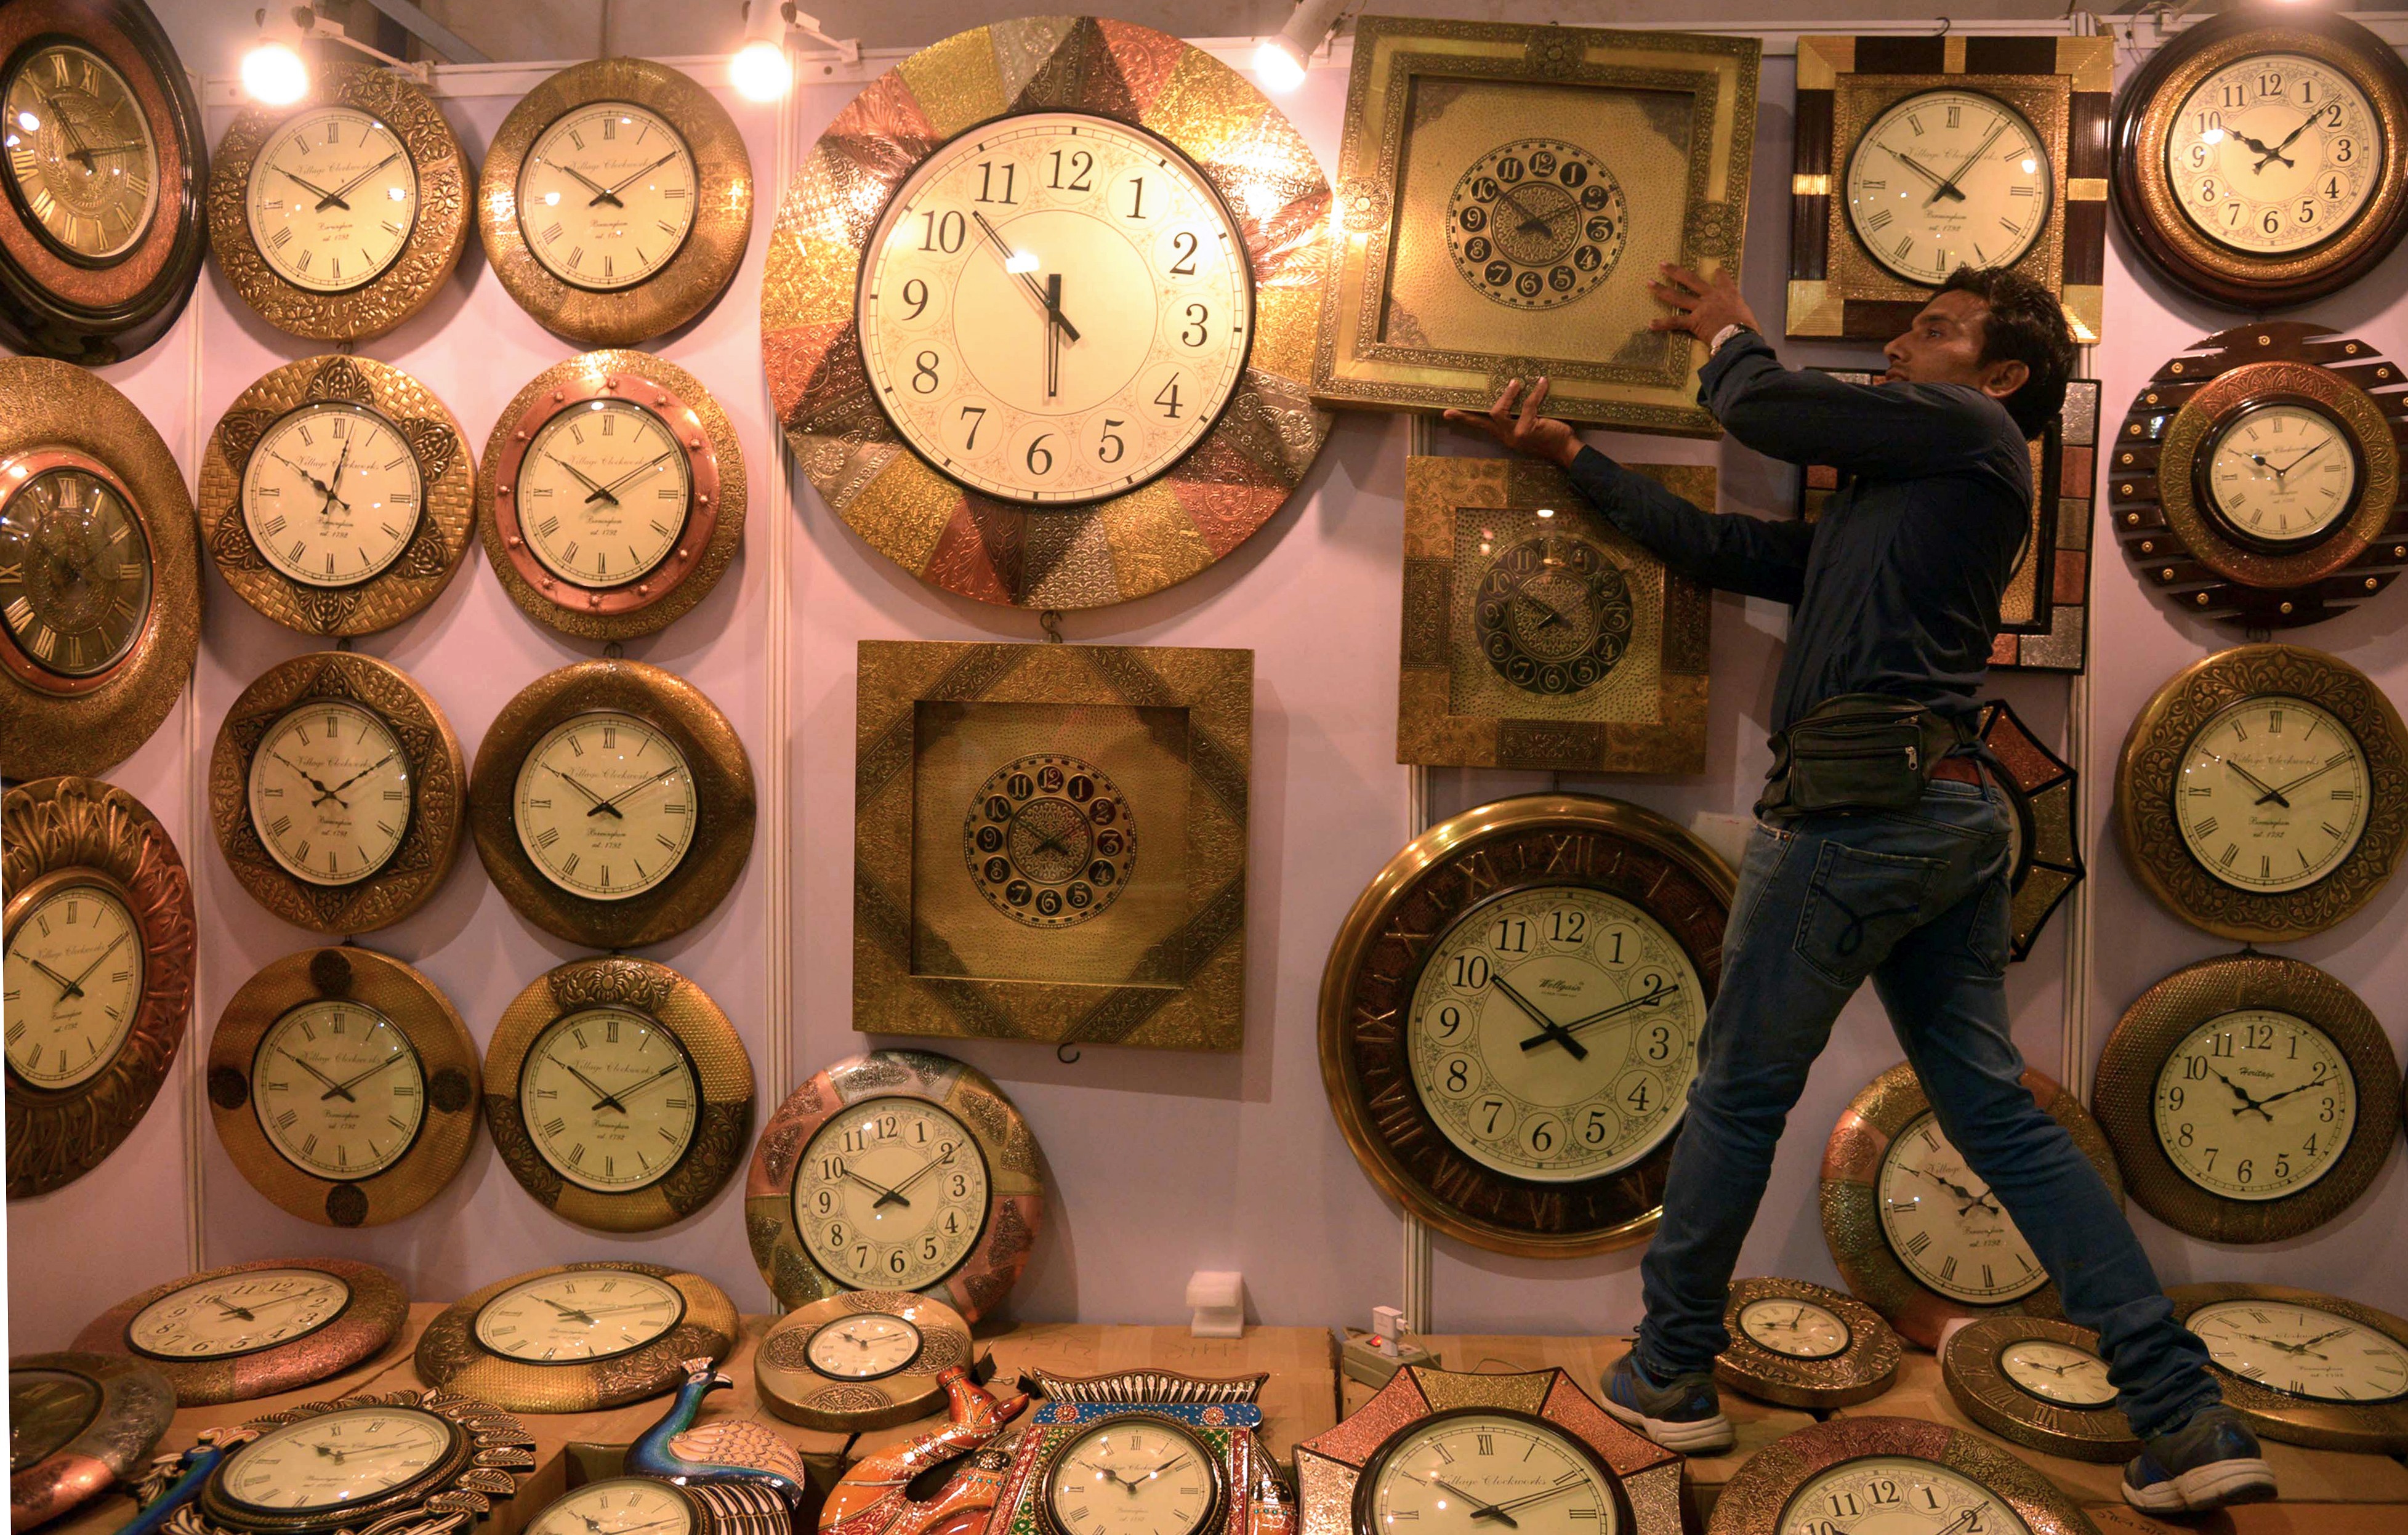 It's not this hard: New studies show better way to turn back the clock